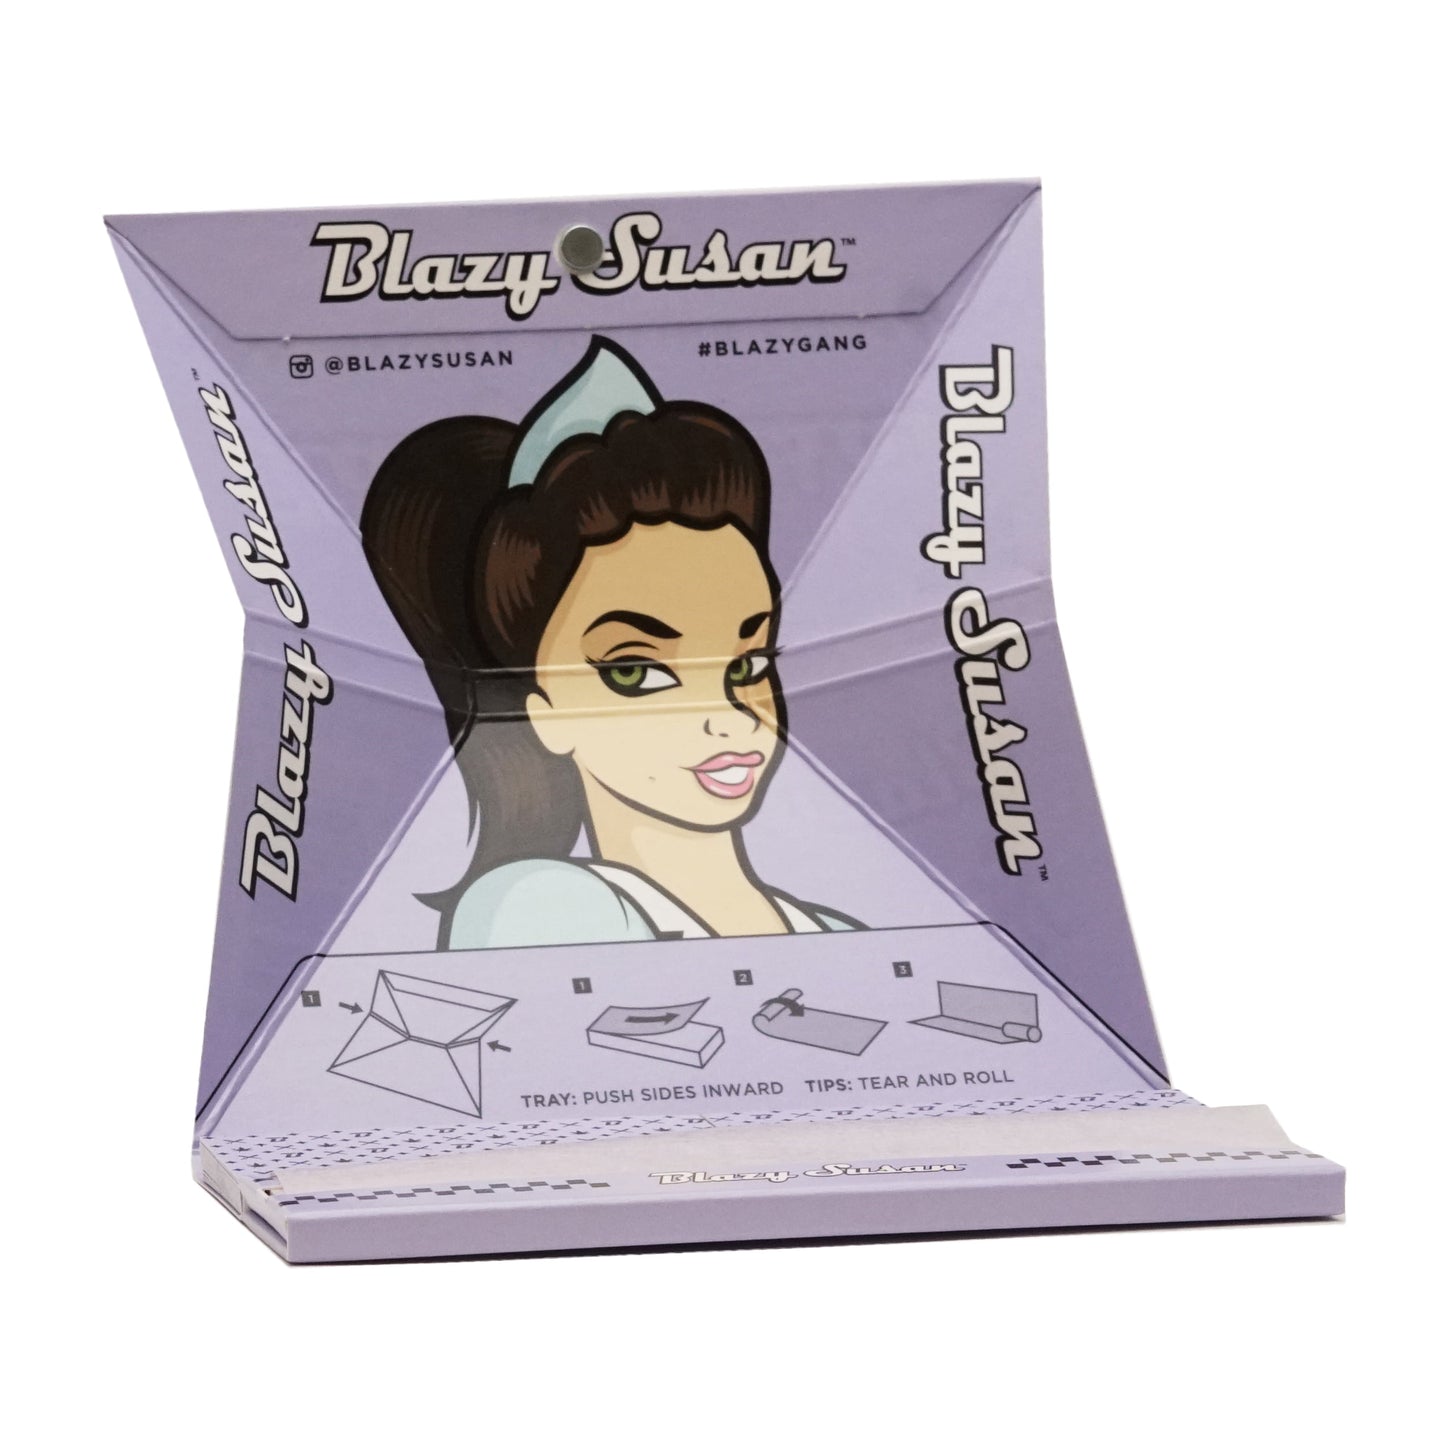 Blazy Susan - Purple Deluxe Rolling Papers (King Size Slim)